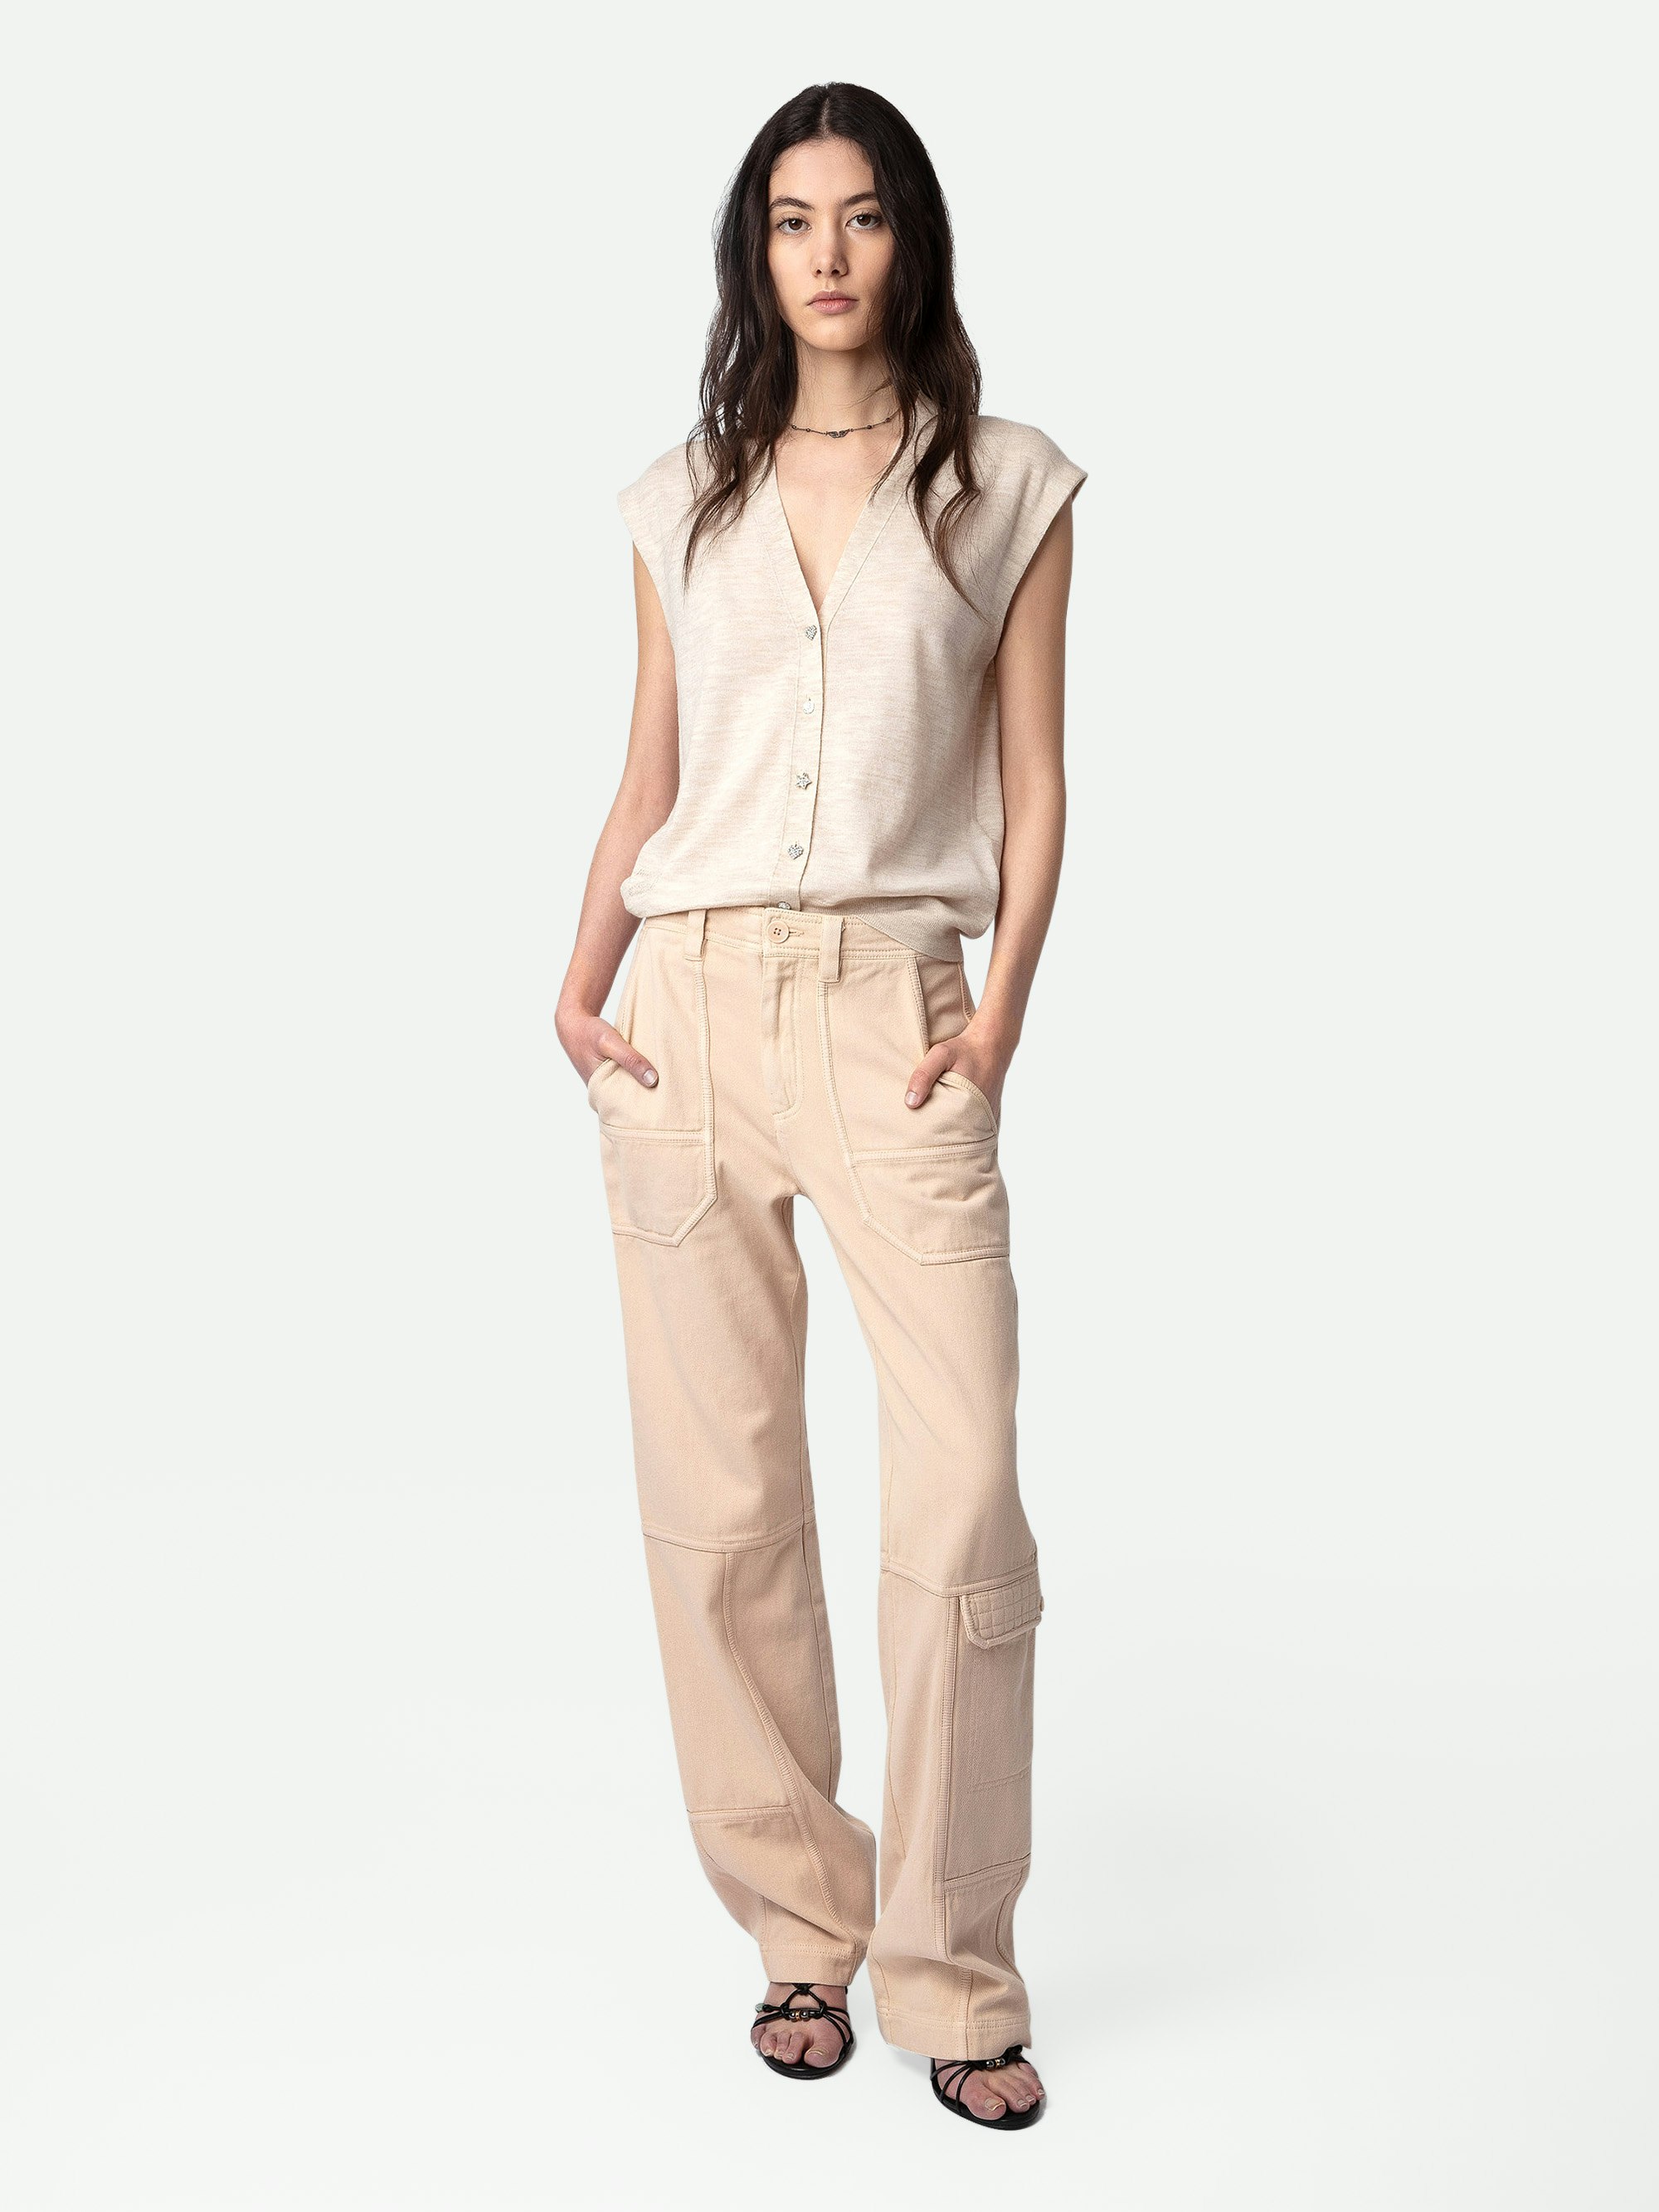 Pepper Pants - Beige cotton twill pants with contrasting details.